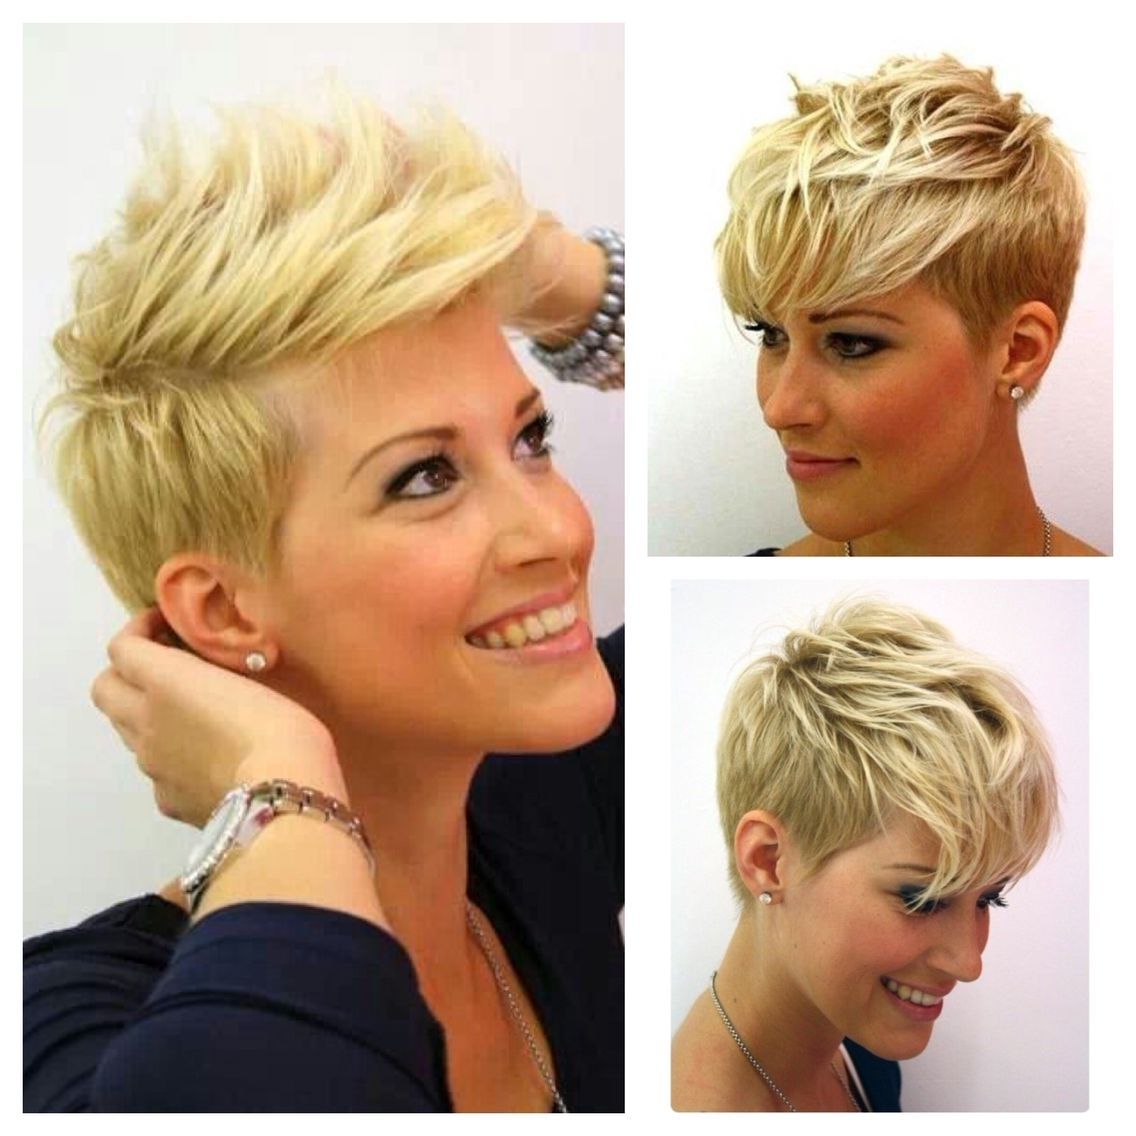 Super Cute Short Layered Pixie Cut For Fine Hair | Fun Things For With Regard To Latest Layered Pixie Hairstyles (View 6 of 15)